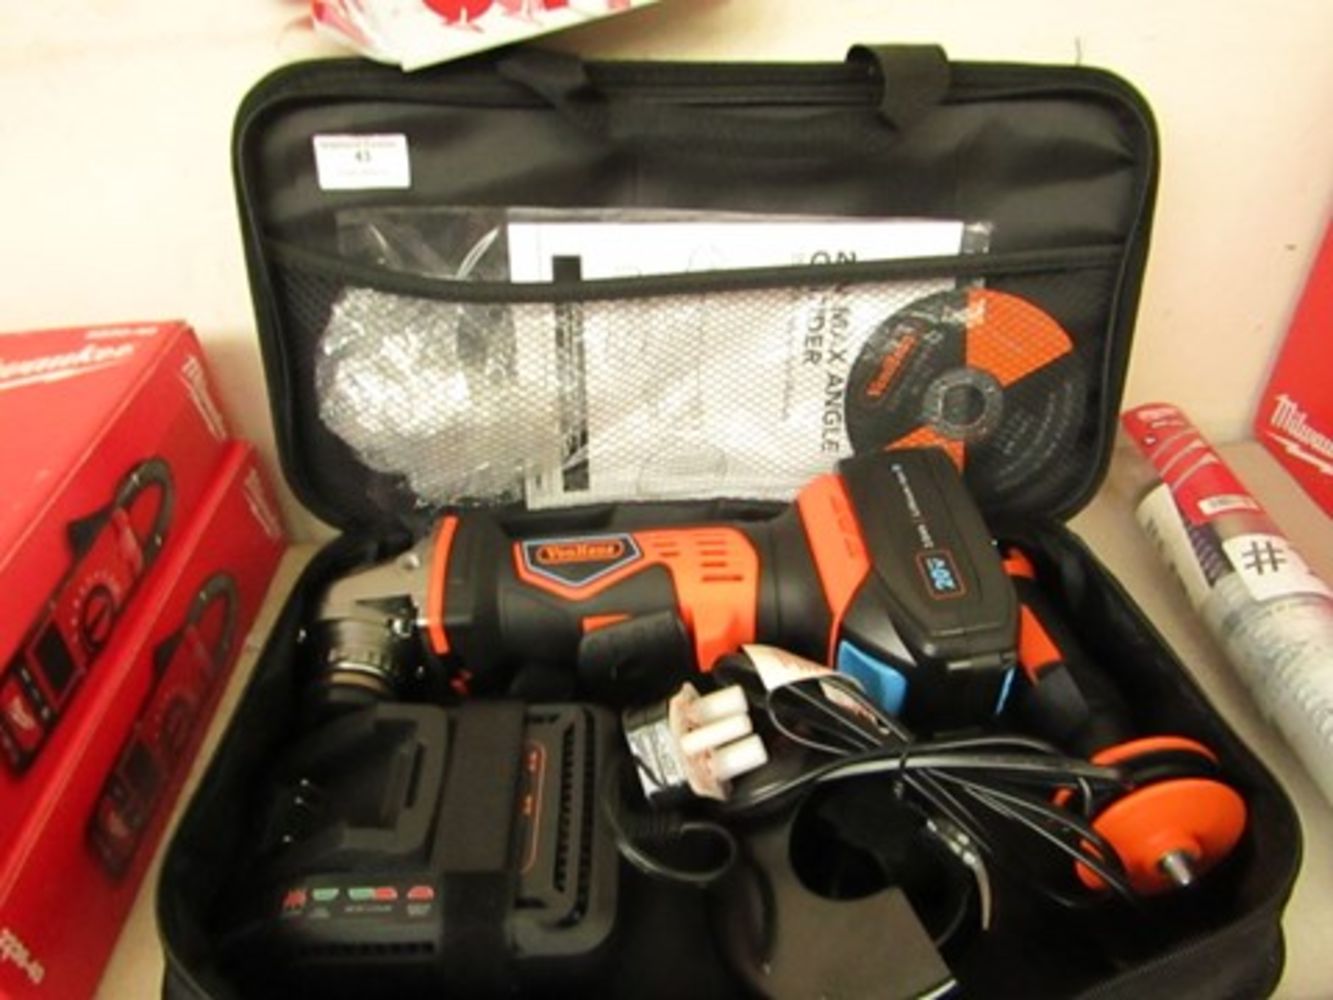 Tool Auction Containing; Subwoofer Car Speakers, Milwaukee Tools, Packs of Fixings, Streetwize Accessories and Much More!